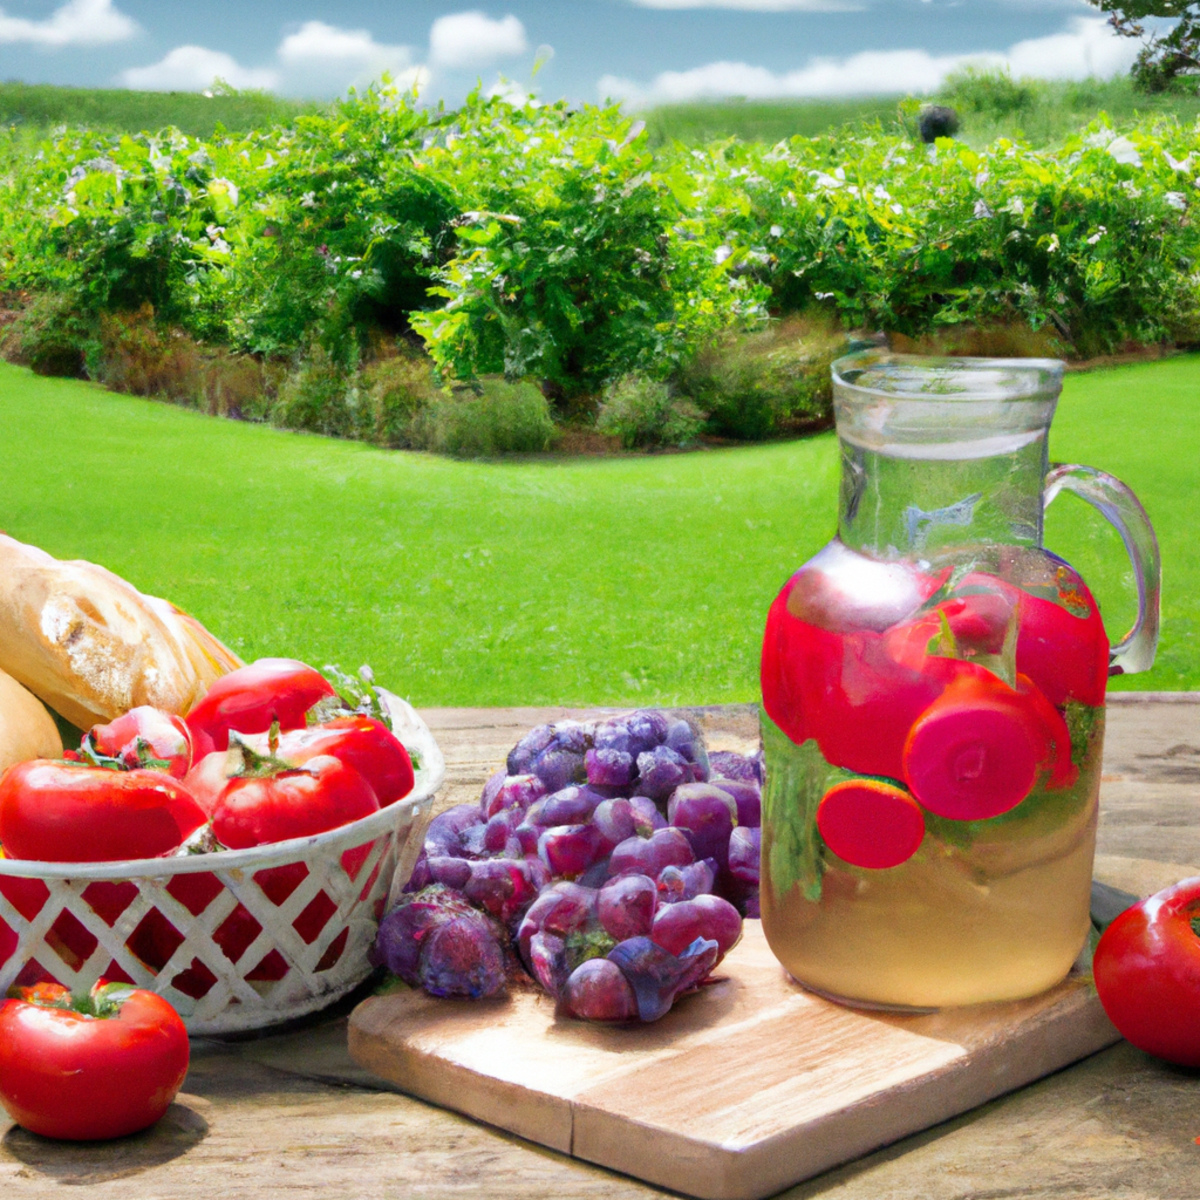 The photo captures a rustic wooden table adorned with an array of fresh produce, including vibrant red tomatoes, leafy greens, and plump purple grapes. A wicker basket filled with freshly baked bread sits in the center, while a pitcher of ice-cold water and a mason jar of homemade lemonade complete the scene. In the background, a lush green field stretches out, hinting at the source of these wholesome ingredients. The photo exudes a sense of simplicity and naturalness, inviting the viewer to embrace the farm-to-table lifestyle and all its health benefits.